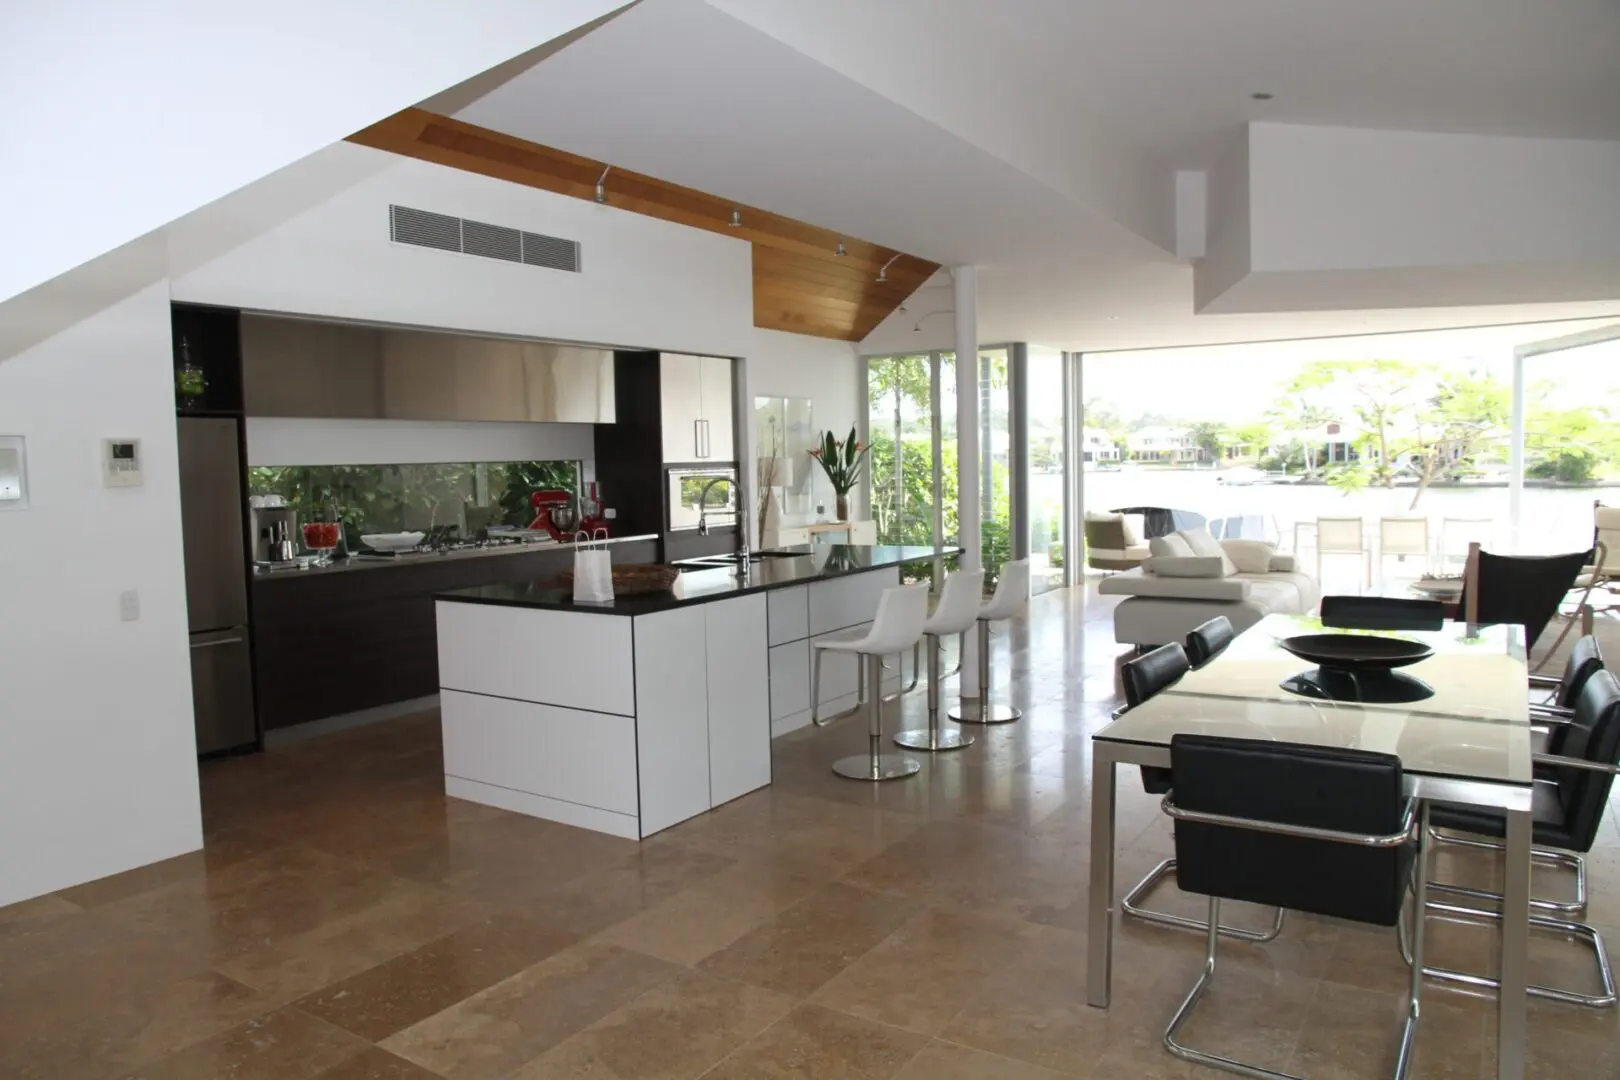 A contemporary kitchen next to a dining room